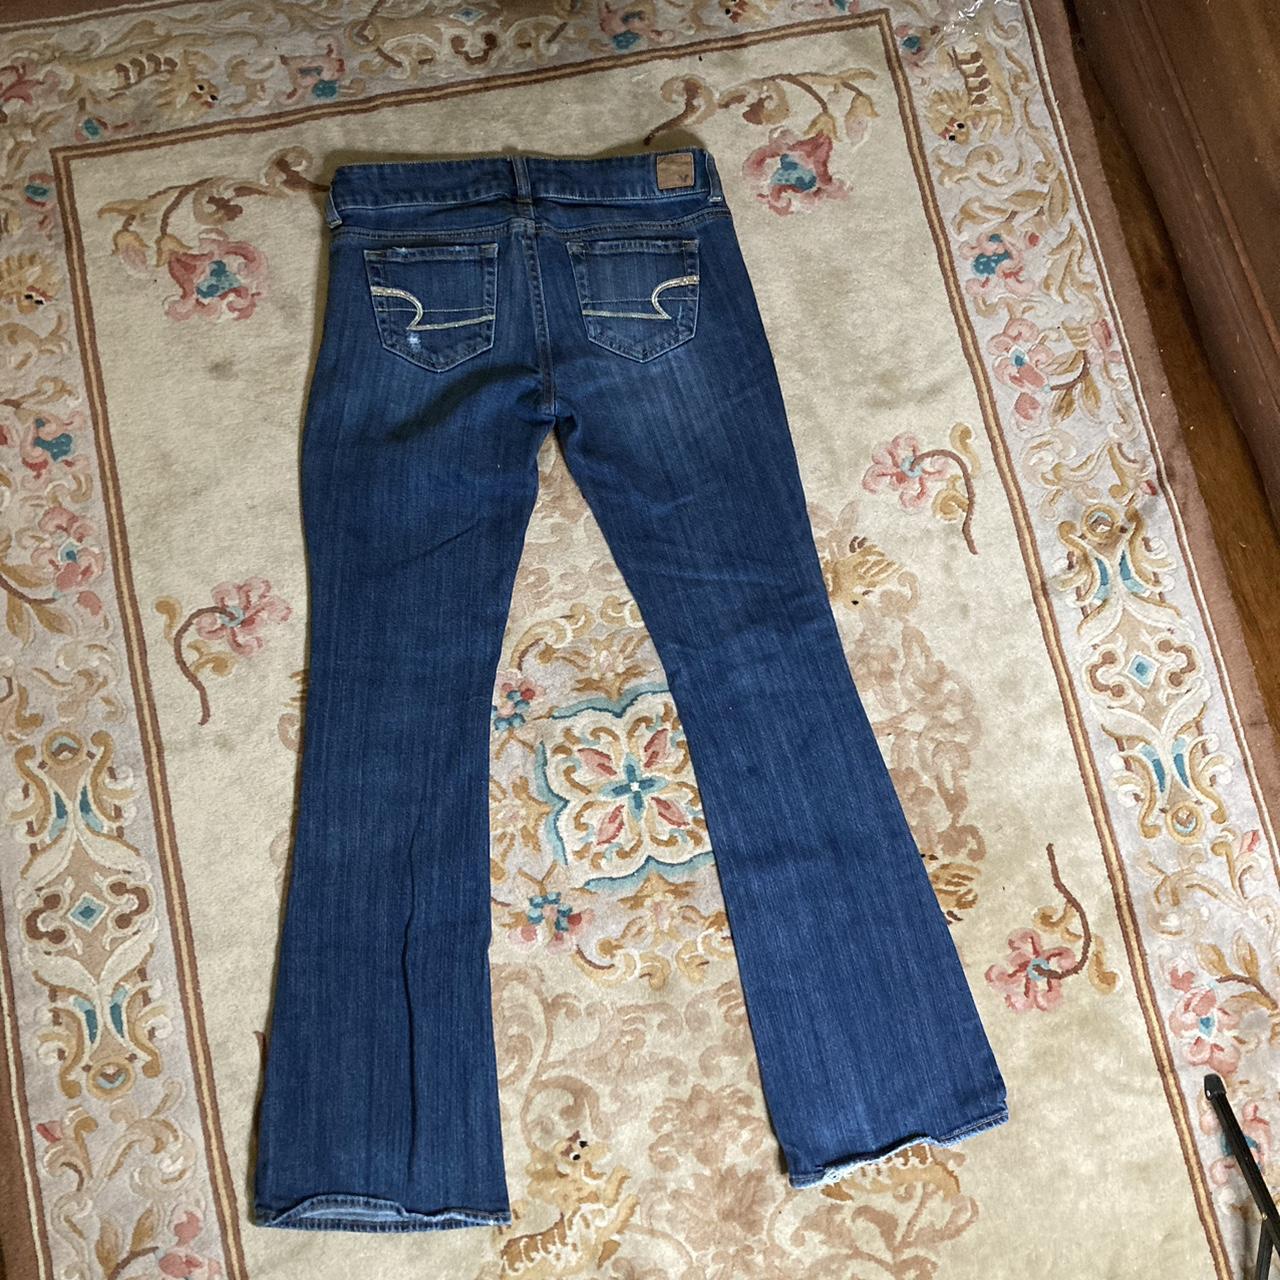 Low rise bootcut dark wash distressed jeans from... - Depop